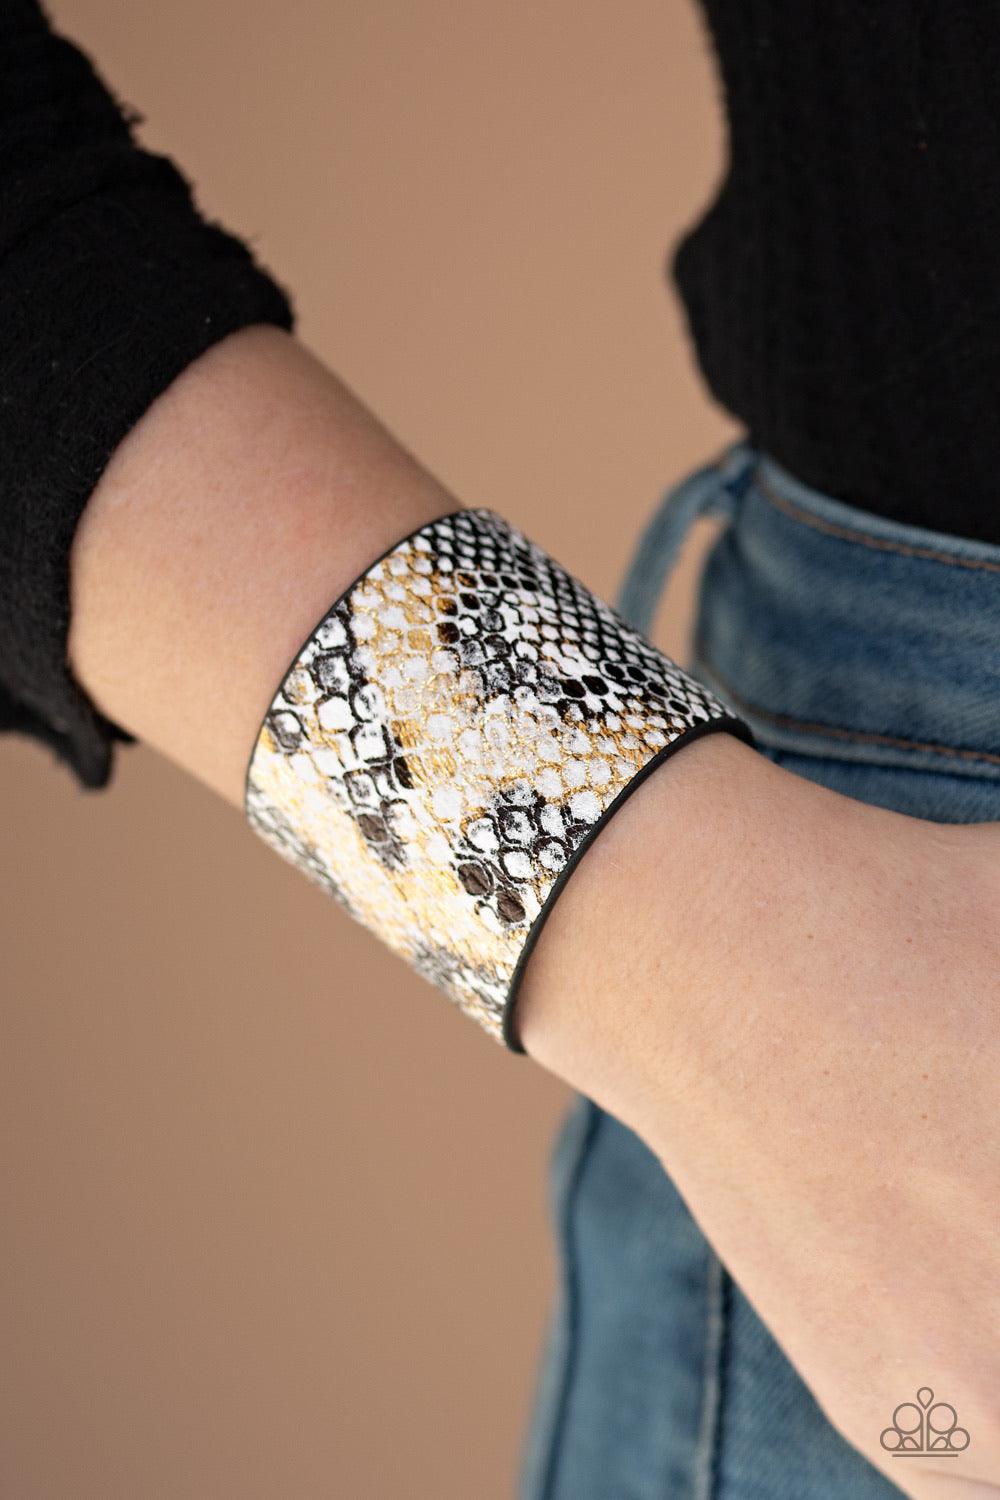 Paparazzi Accessories Serpent Shimmer - Multi Featuring a shiny gold and black python print, a thick white leather band wraps around the wrist for a wild shimmer. Features an adjustable snap closure. Sold as one individual bracelet. Jewelry